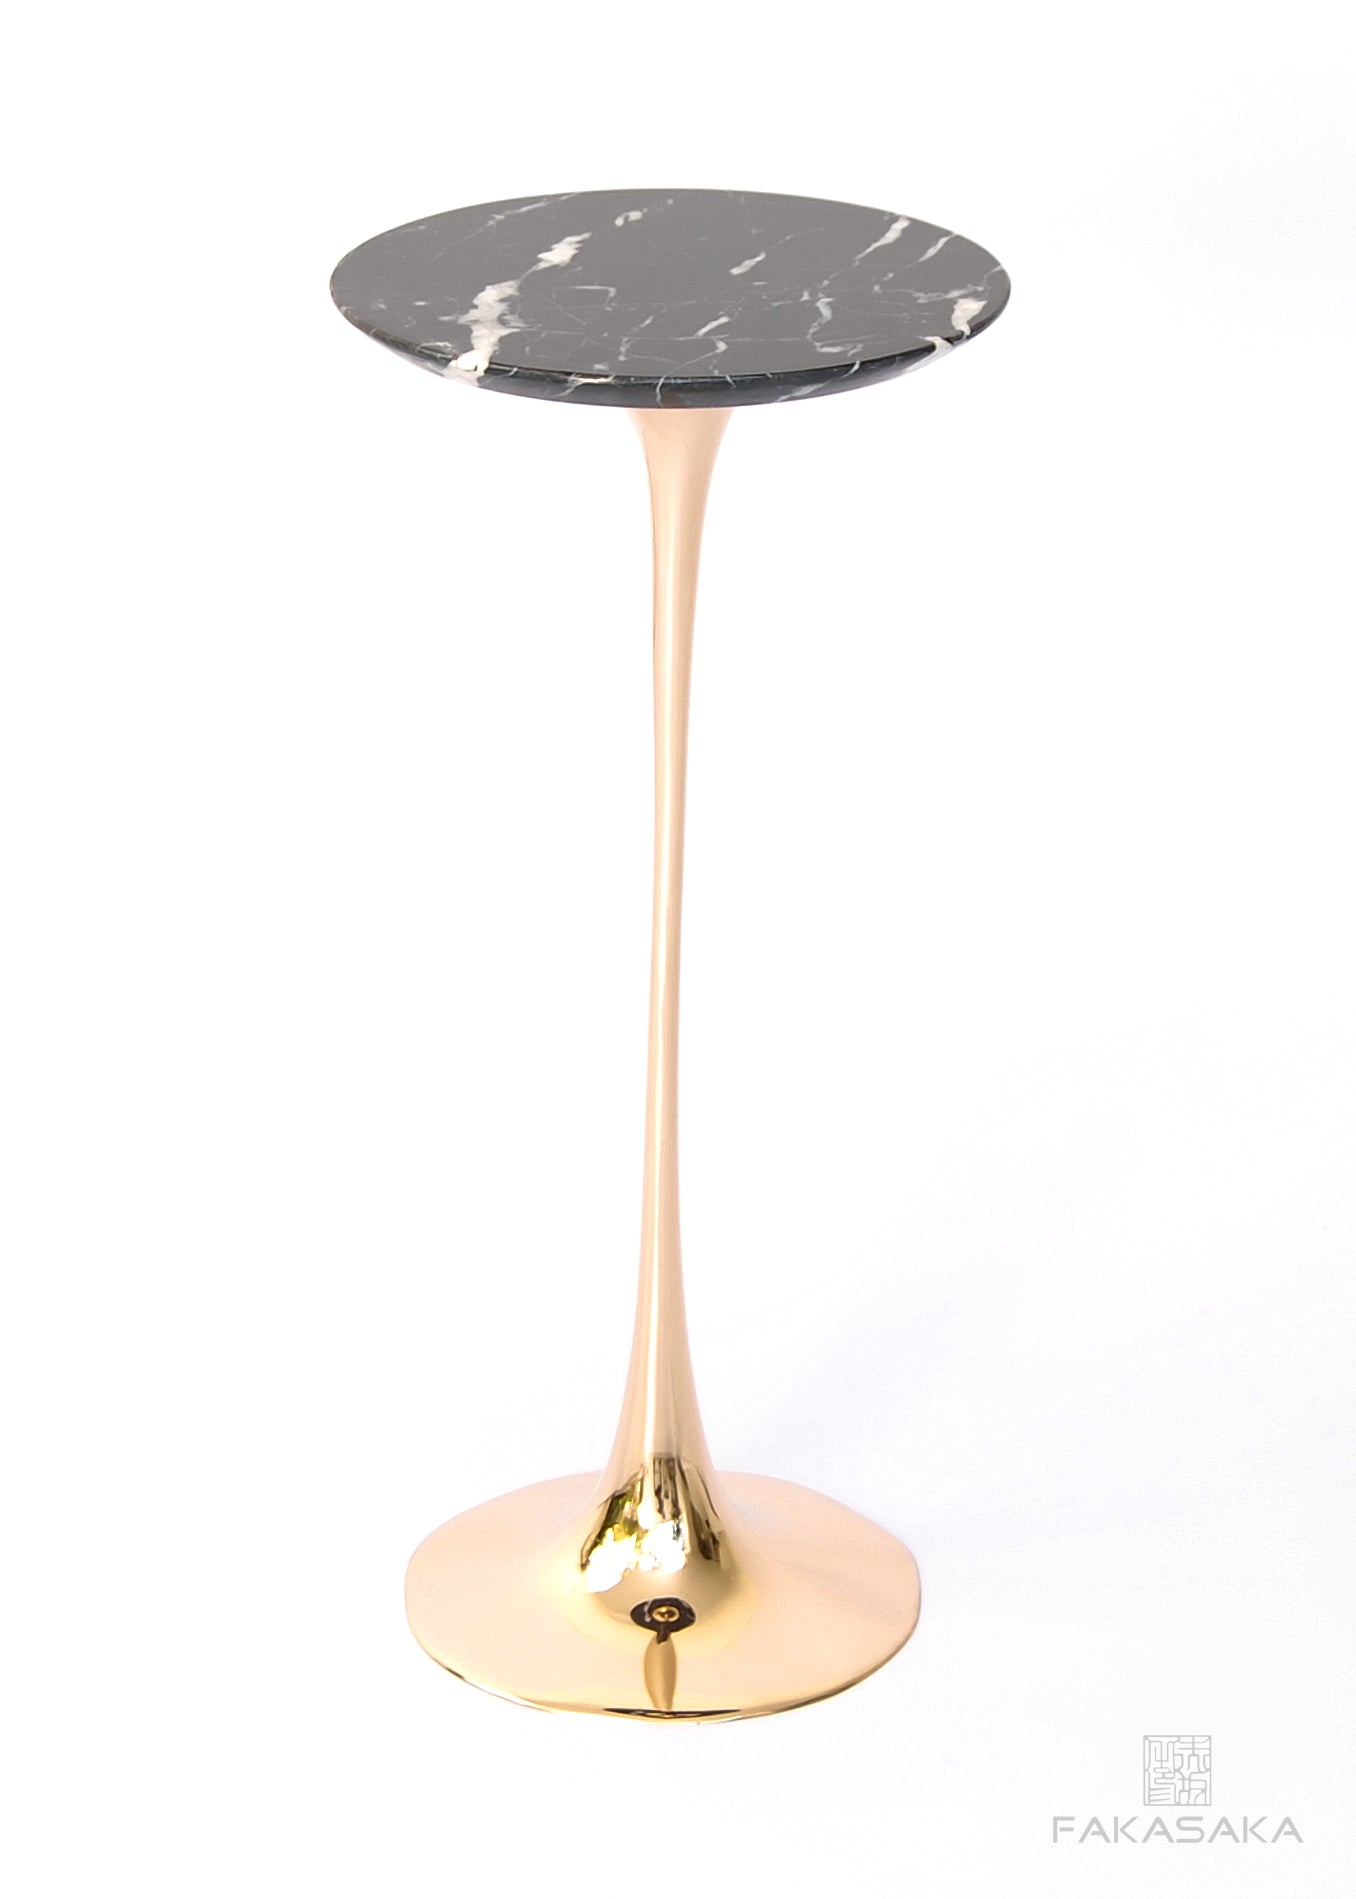 APPLE DRINK TABLE<br><br>NERO MARQUINA MARBLE<br>POLISHED BRONZE